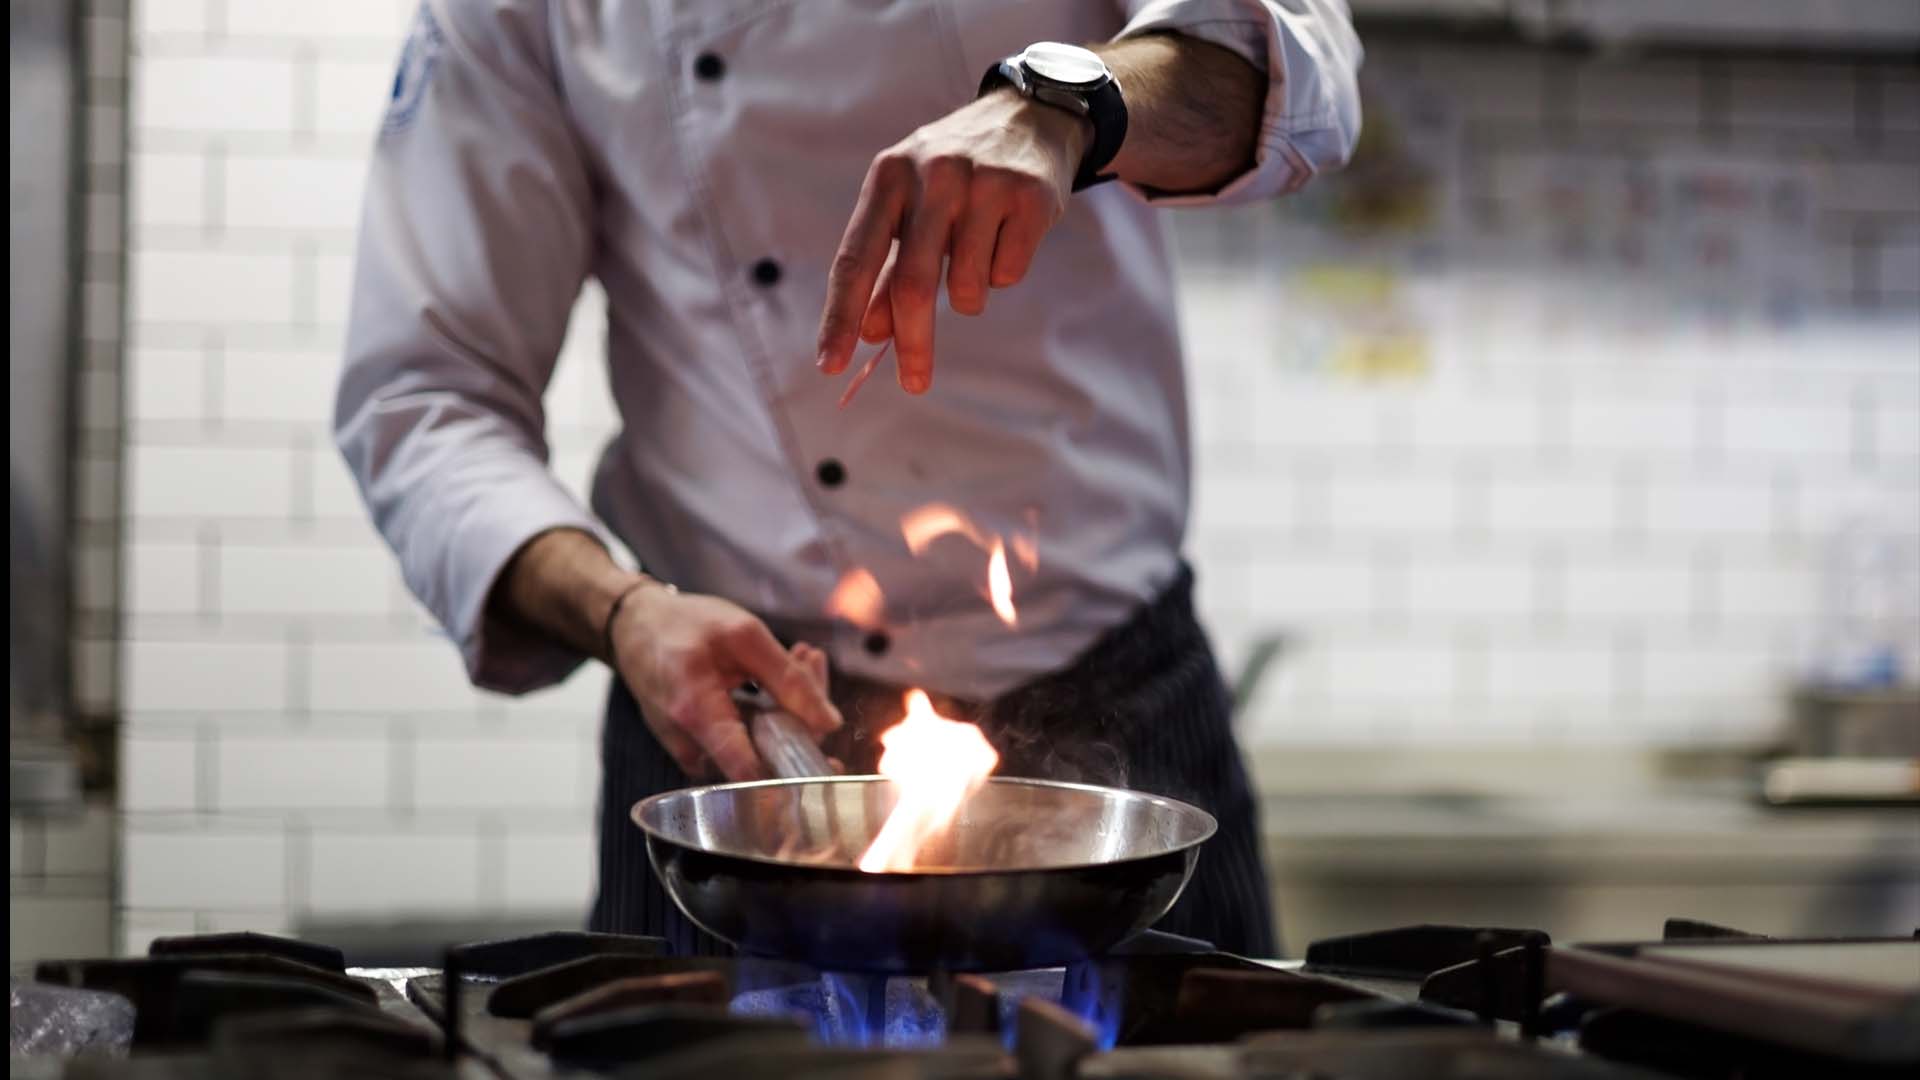 A chef flambes a dish